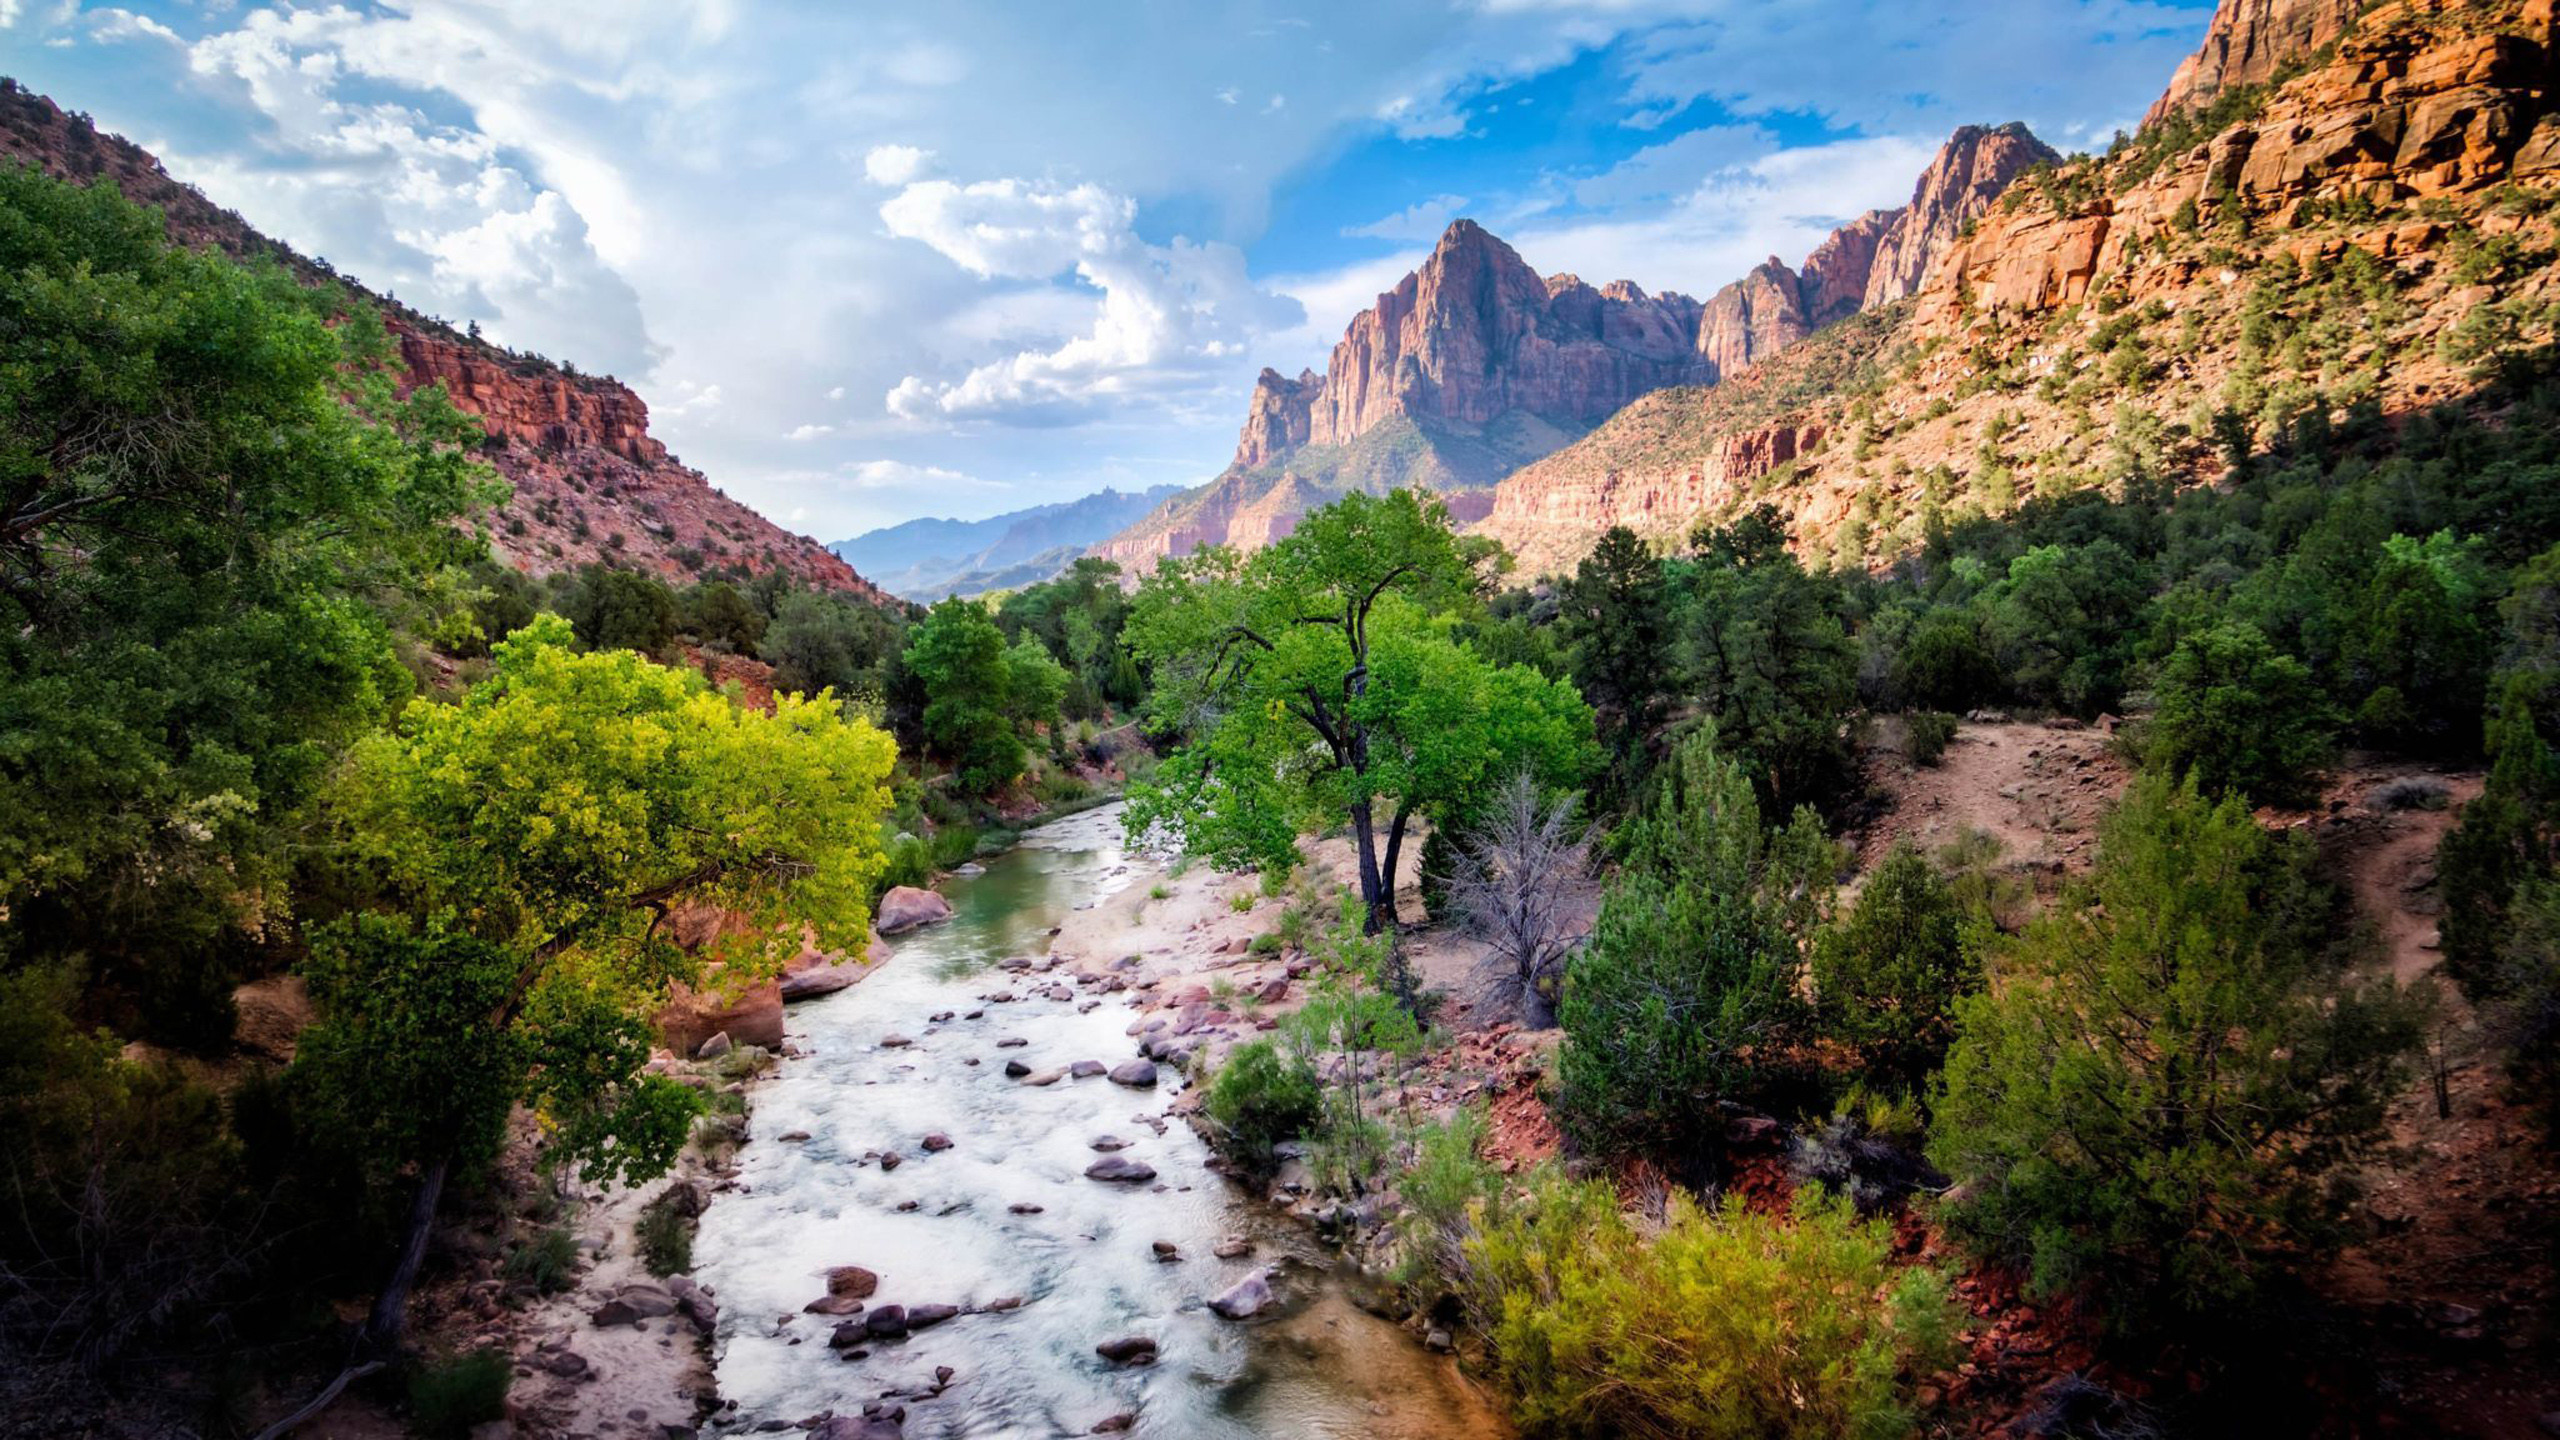 2560x1440 Landscape Rocky Mountains Trees Blue Sky White Clouds Virgin River Zion  National Park Utah United States Of America 4k Ultra Hd Wallpapers 2560Ã1440